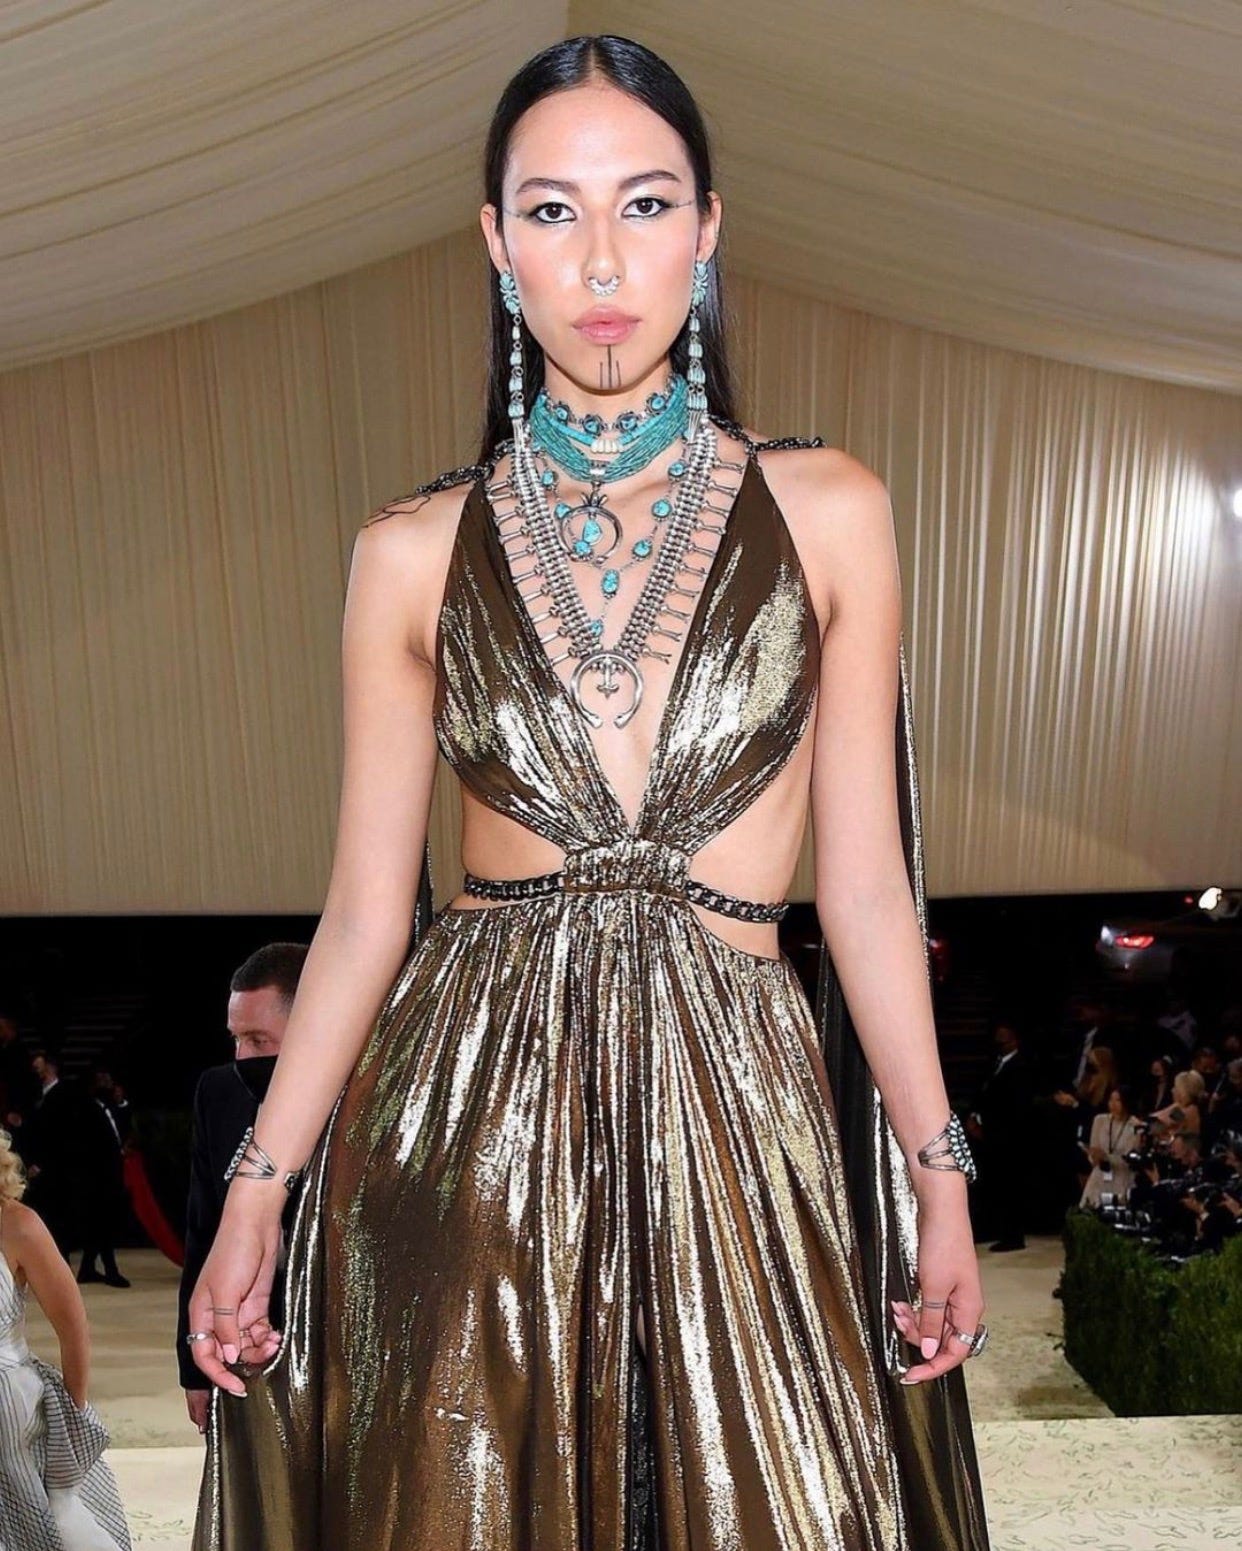 Indigenous model & activist Quannah Chasinghorse in a custom #DUNDASXREVOLVE gold lamé gown at the 2021 Met Gala. She completed her look with traditional Navajo jewelry (turquoise & silver earrings and necklaces) gifted to her by her aunt.